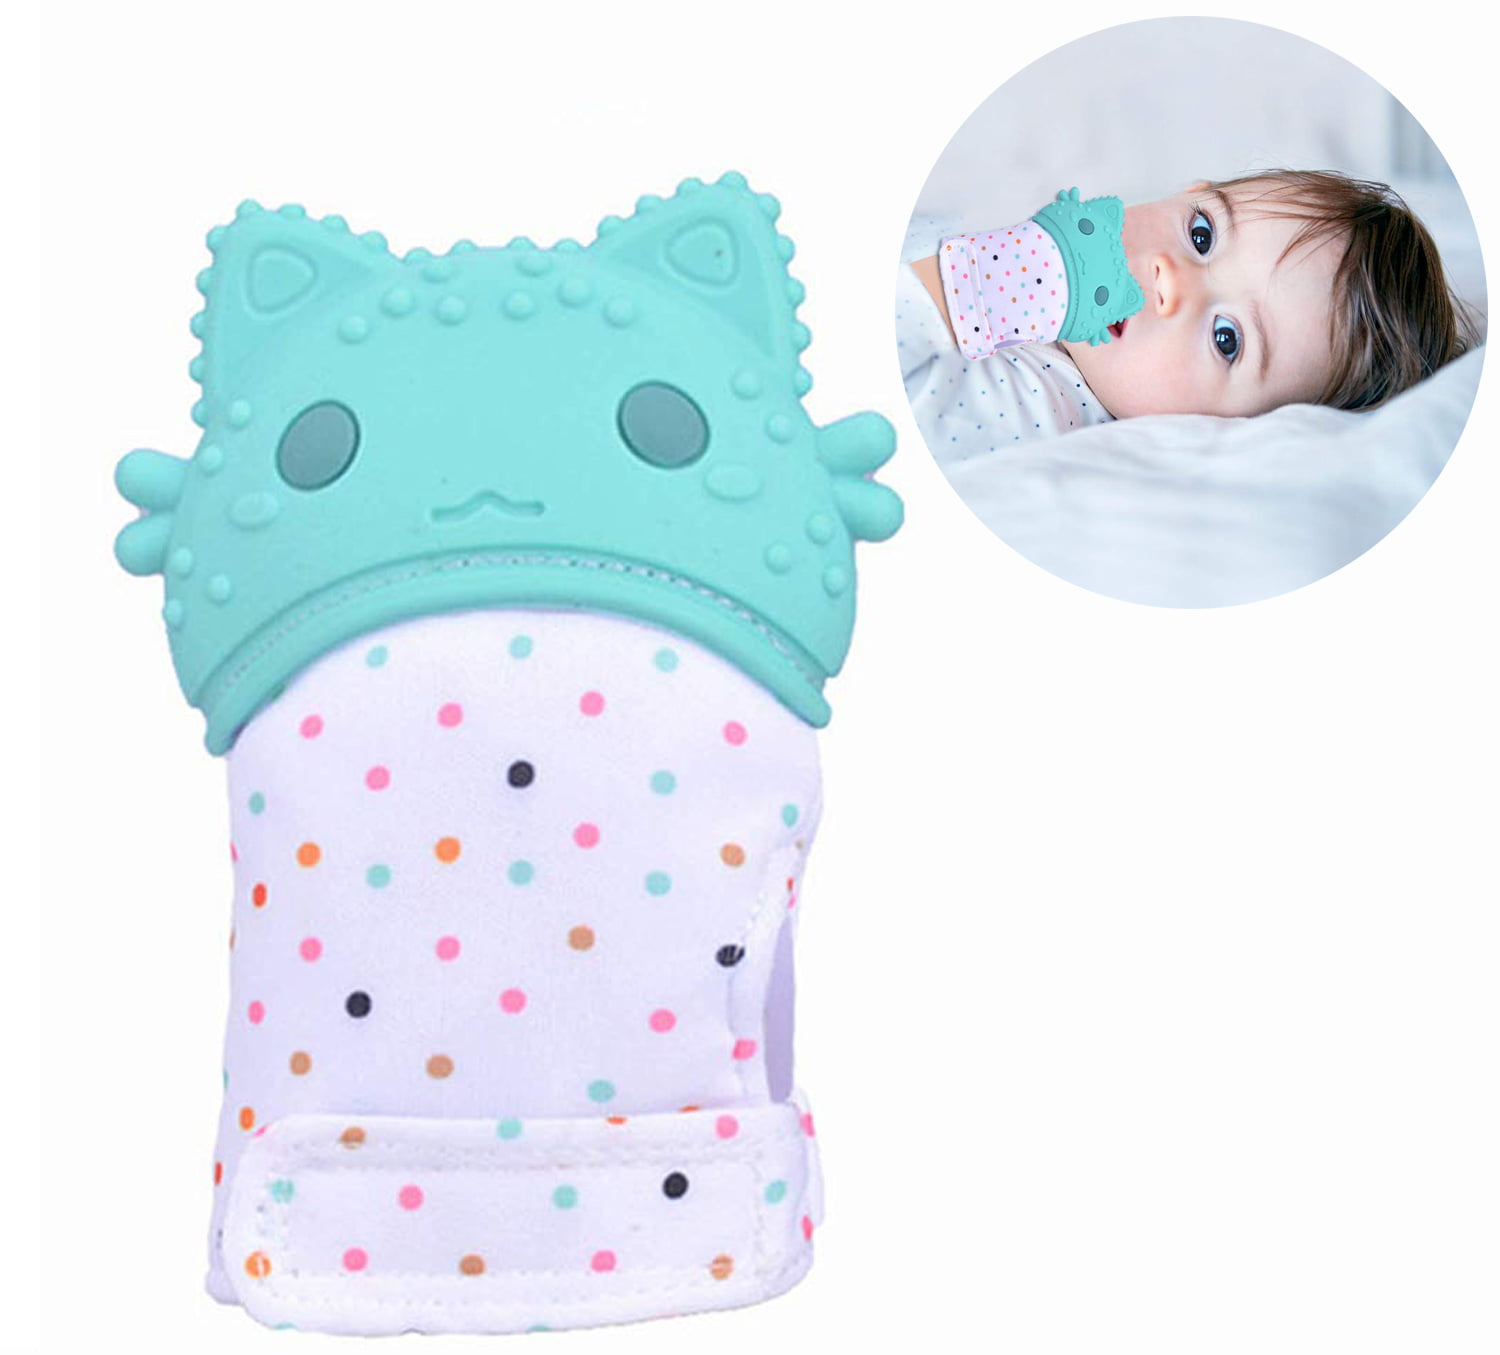 Stimulating Teether Toy 2 Mittens, Mint+Pink Stay on Baby??s Hand for 0-6 Months Baby Girls Prevent Scratches Protection Glove with Travel Bag Giftty Baby Teething Mittens Self Soothing Pain Relief Mitt 